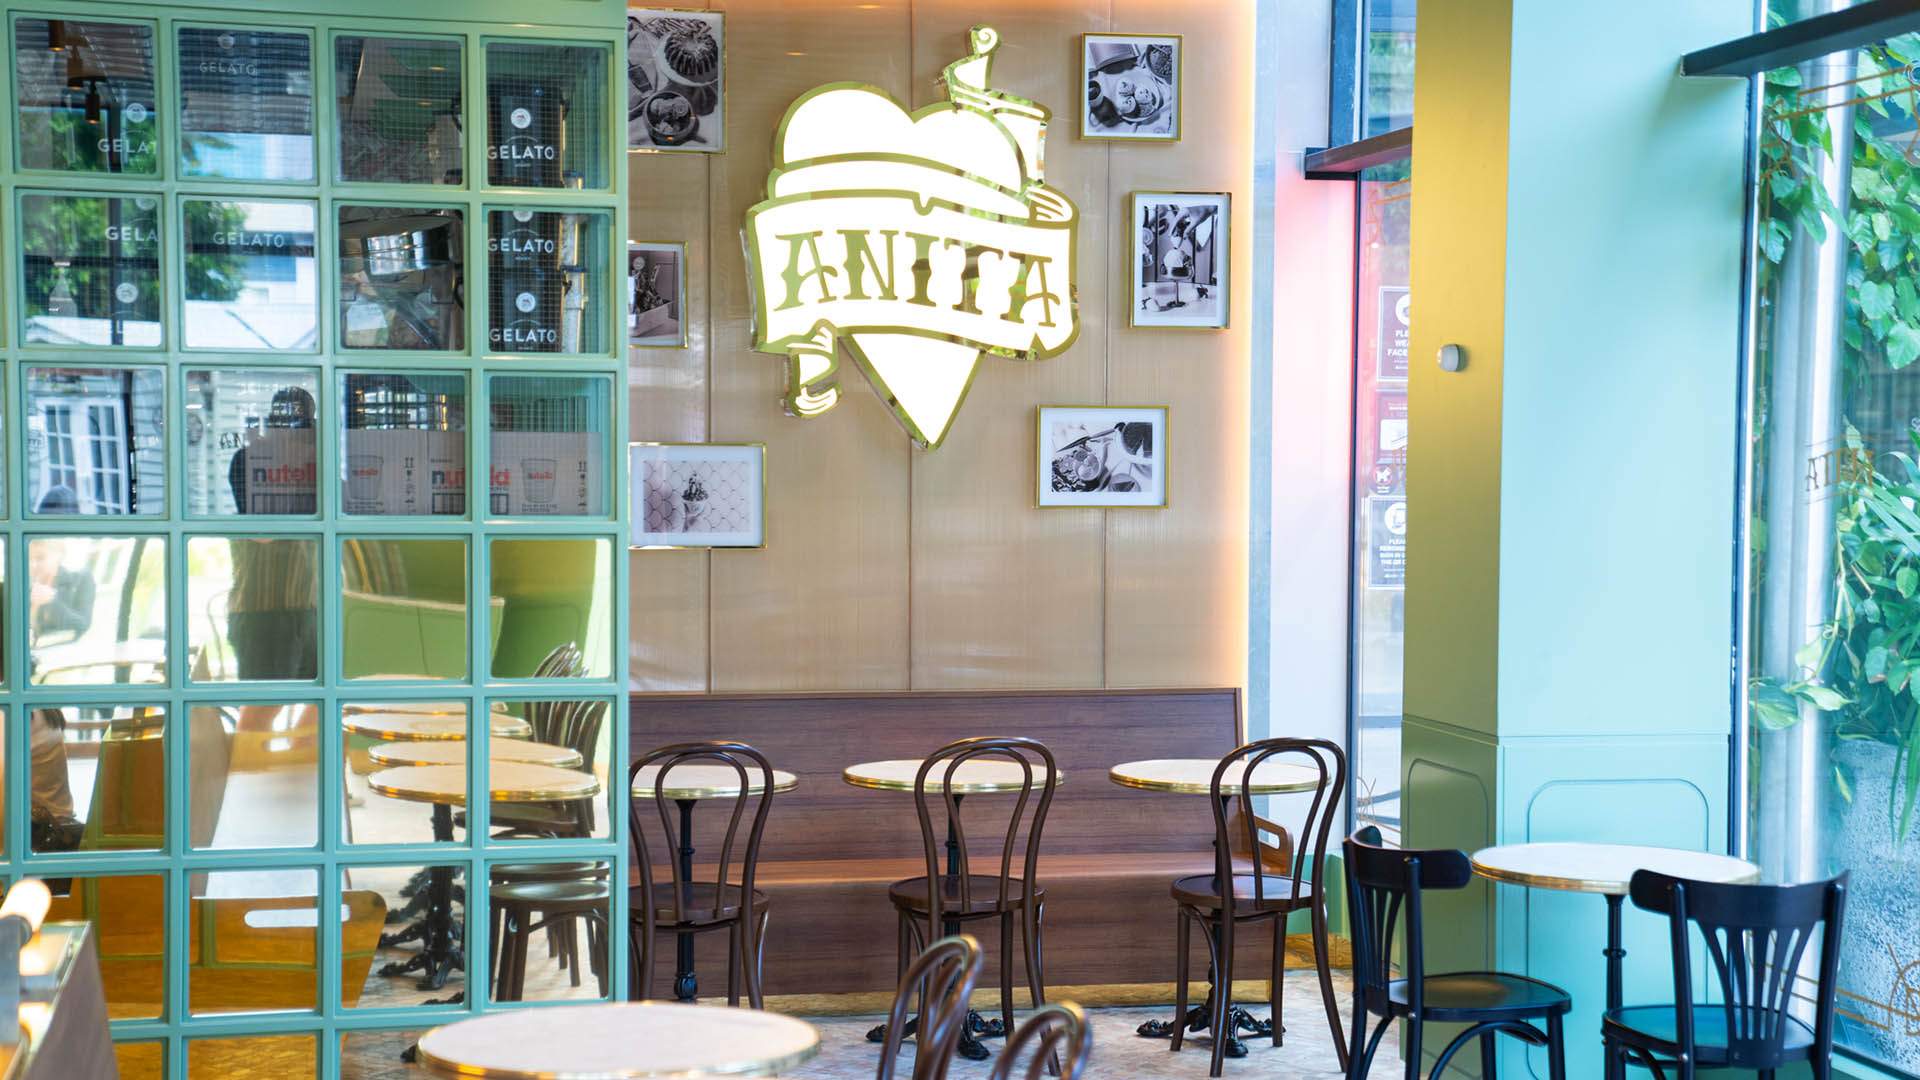 Anita Gelato Has Opened Its First Queensland Store in West Village's Old Peters Ice Cream Factory